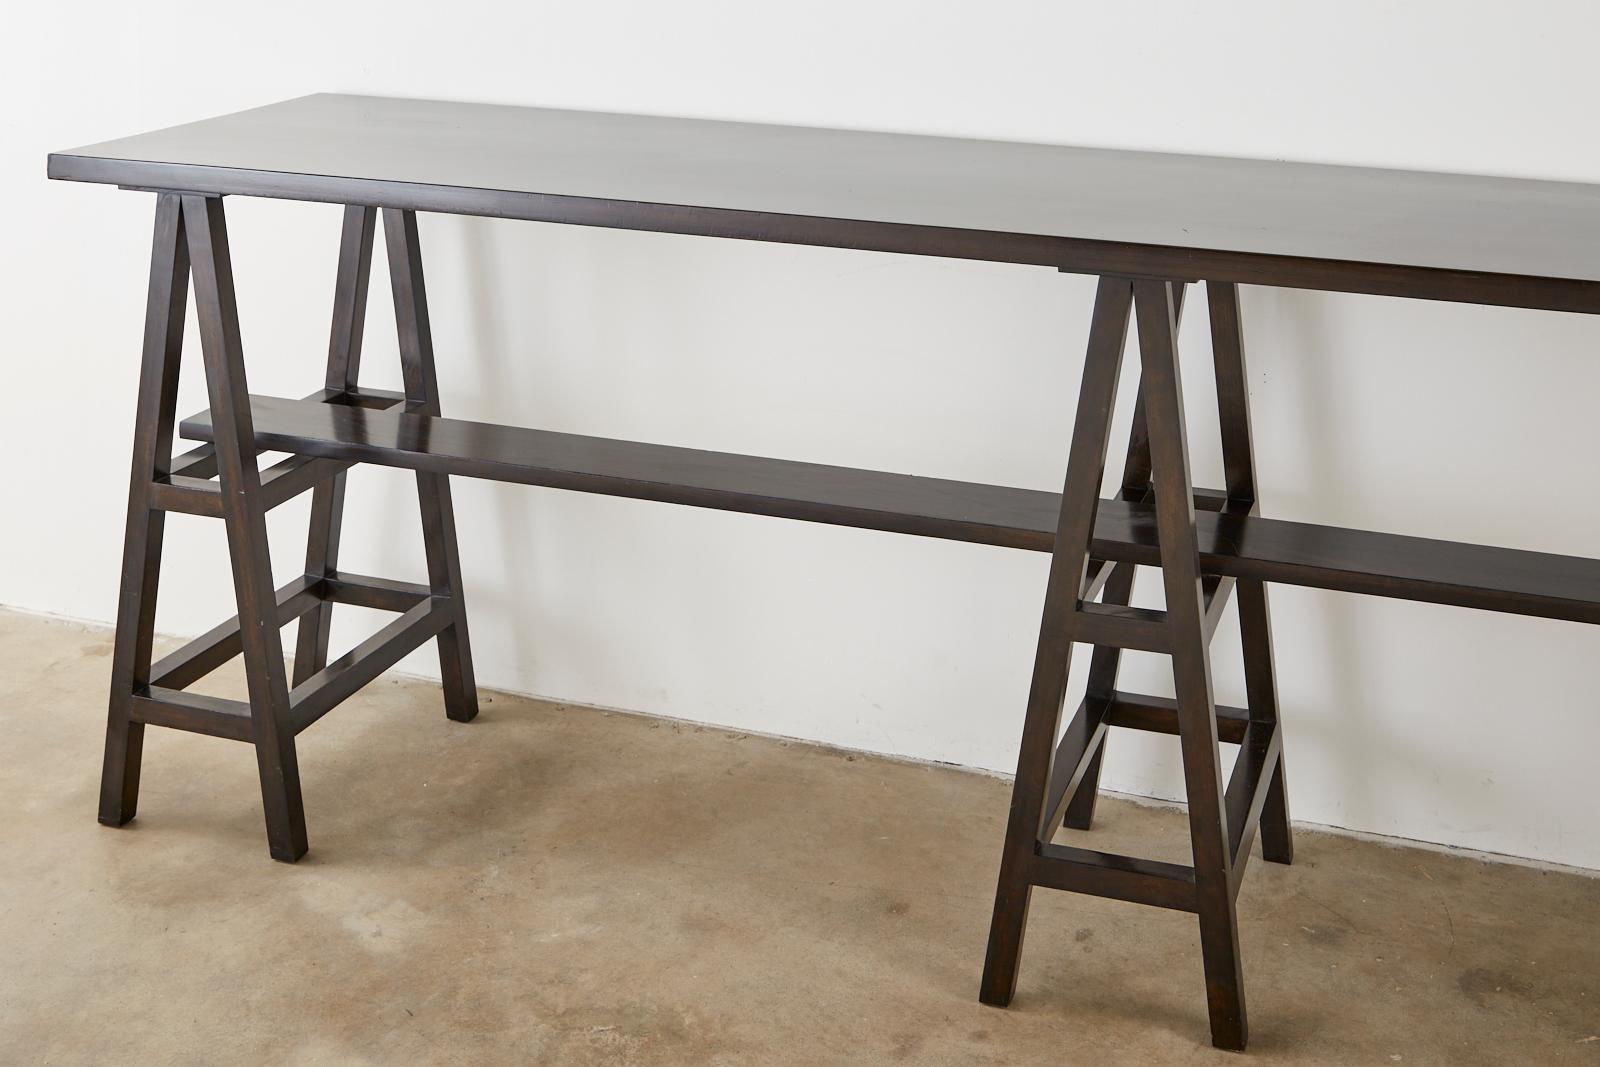 Hand-Crafted Modern Triple Pedestal Sawhorse Console Table or Bar